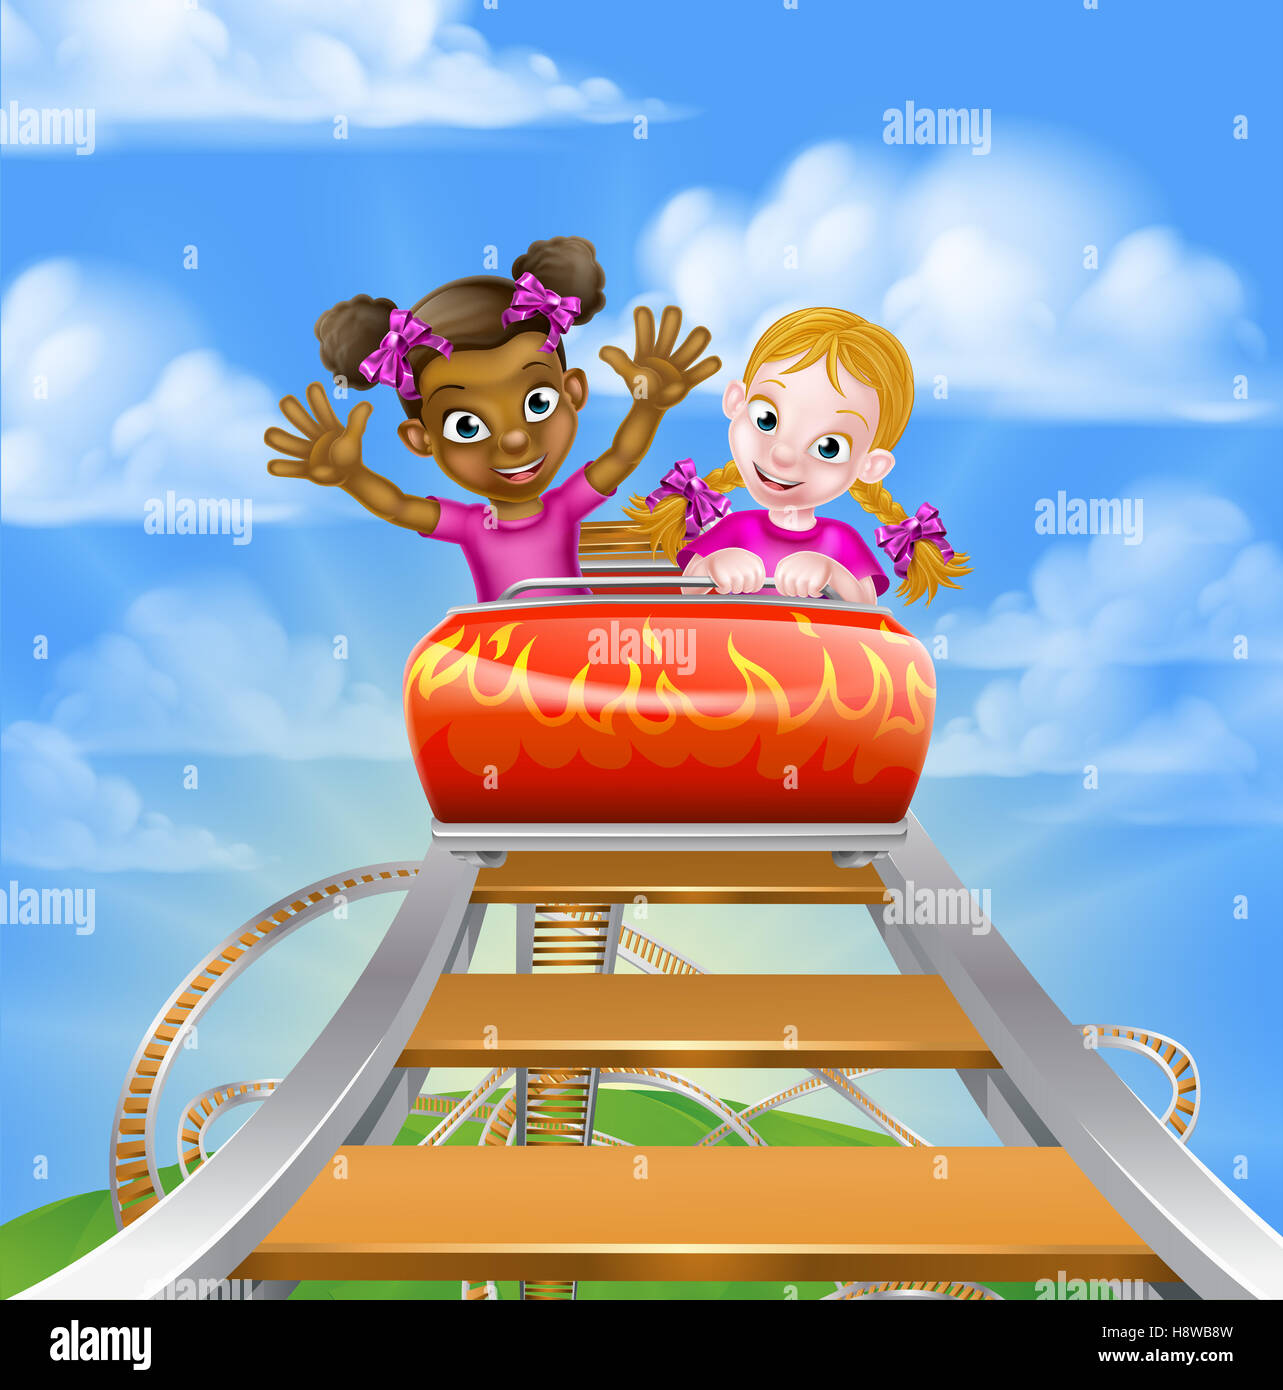 Cartoon girls riding on a roller coaster ride at a theme park or amusement park Stock Photo